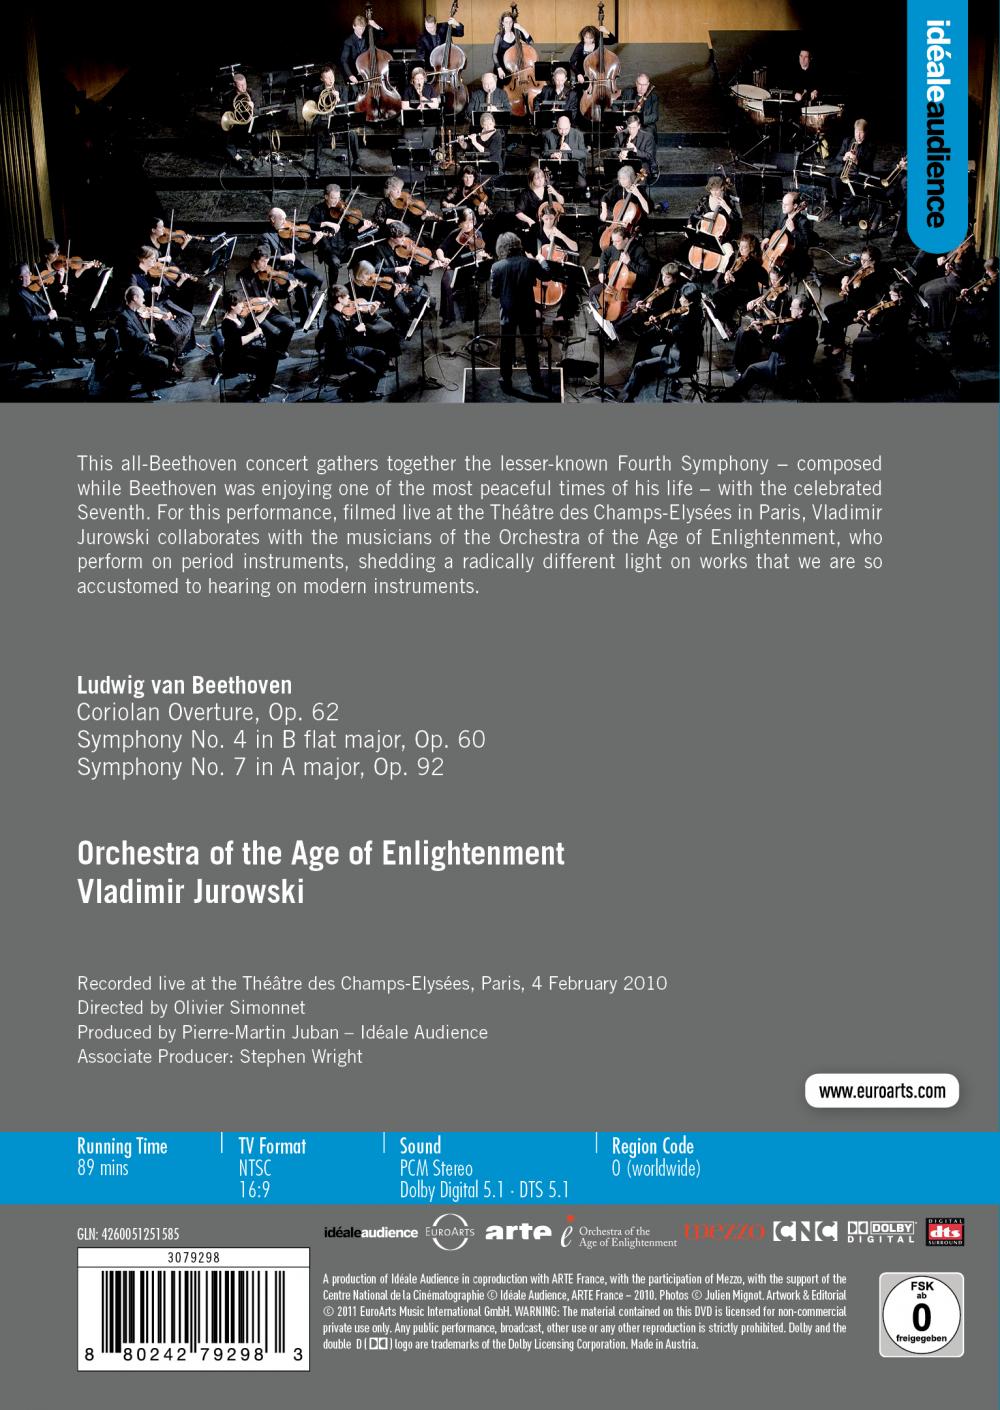 BEETHOVEN: Symphonies Nos 4 & 7, Coriolan Overture - Jurowski, Orchestra of the Age of Enlightenment (DVD)